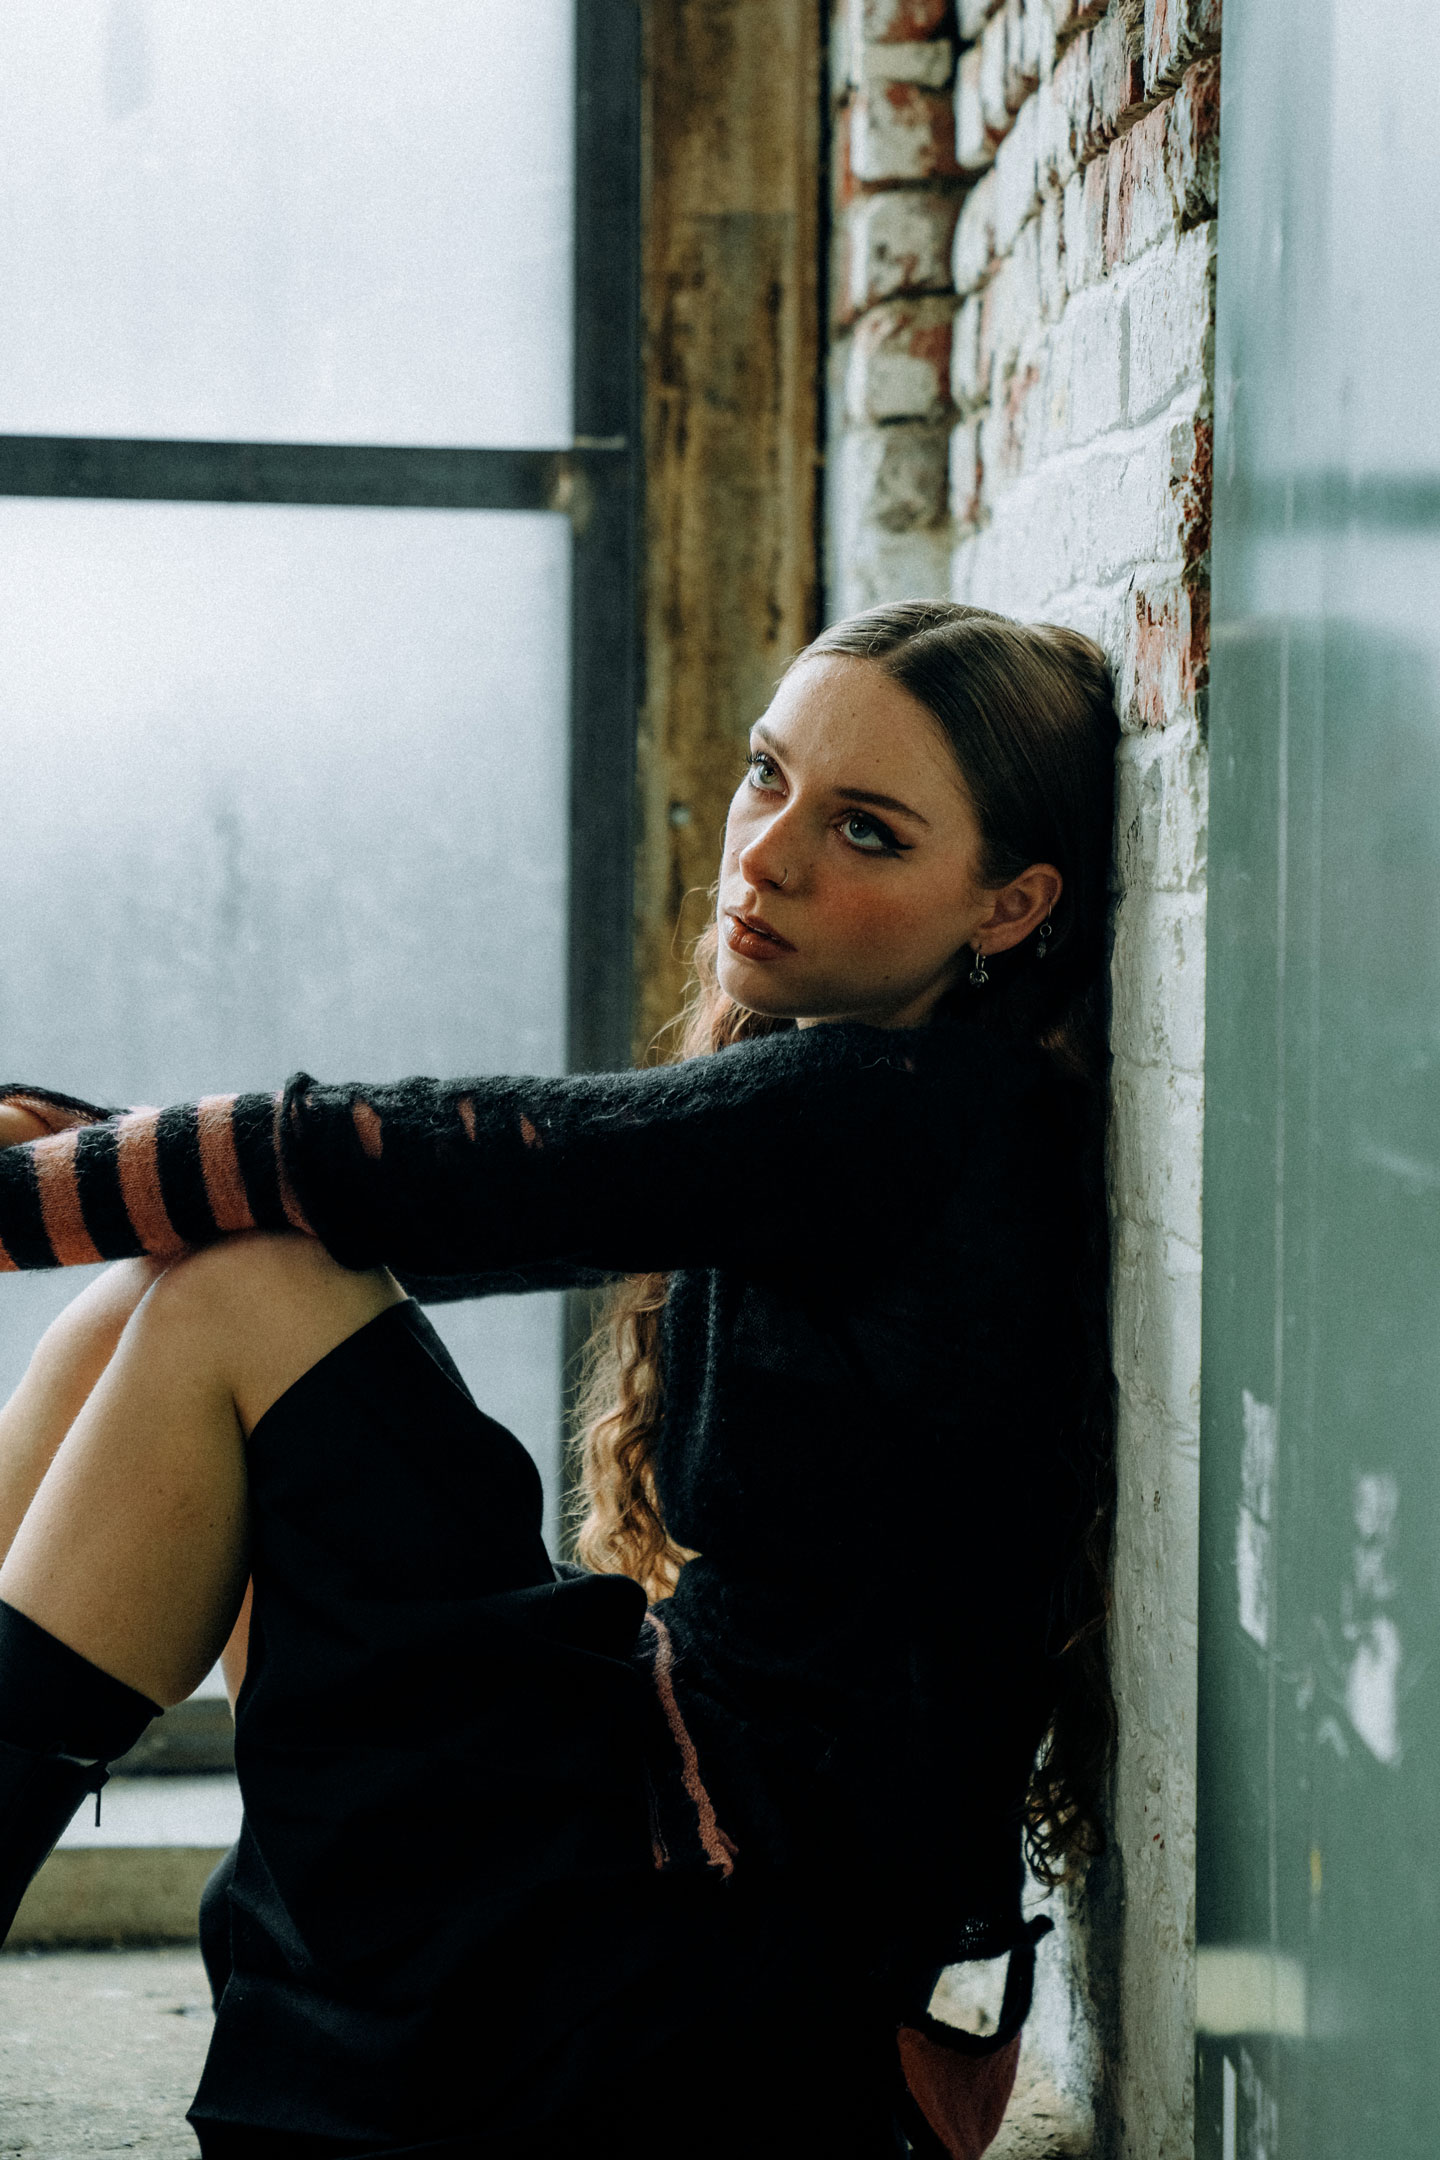 holly humberstone sitting side-on against a tiled wall, she's wearing a skirt and striped sweater and is looking off camera with an annoyed expression 